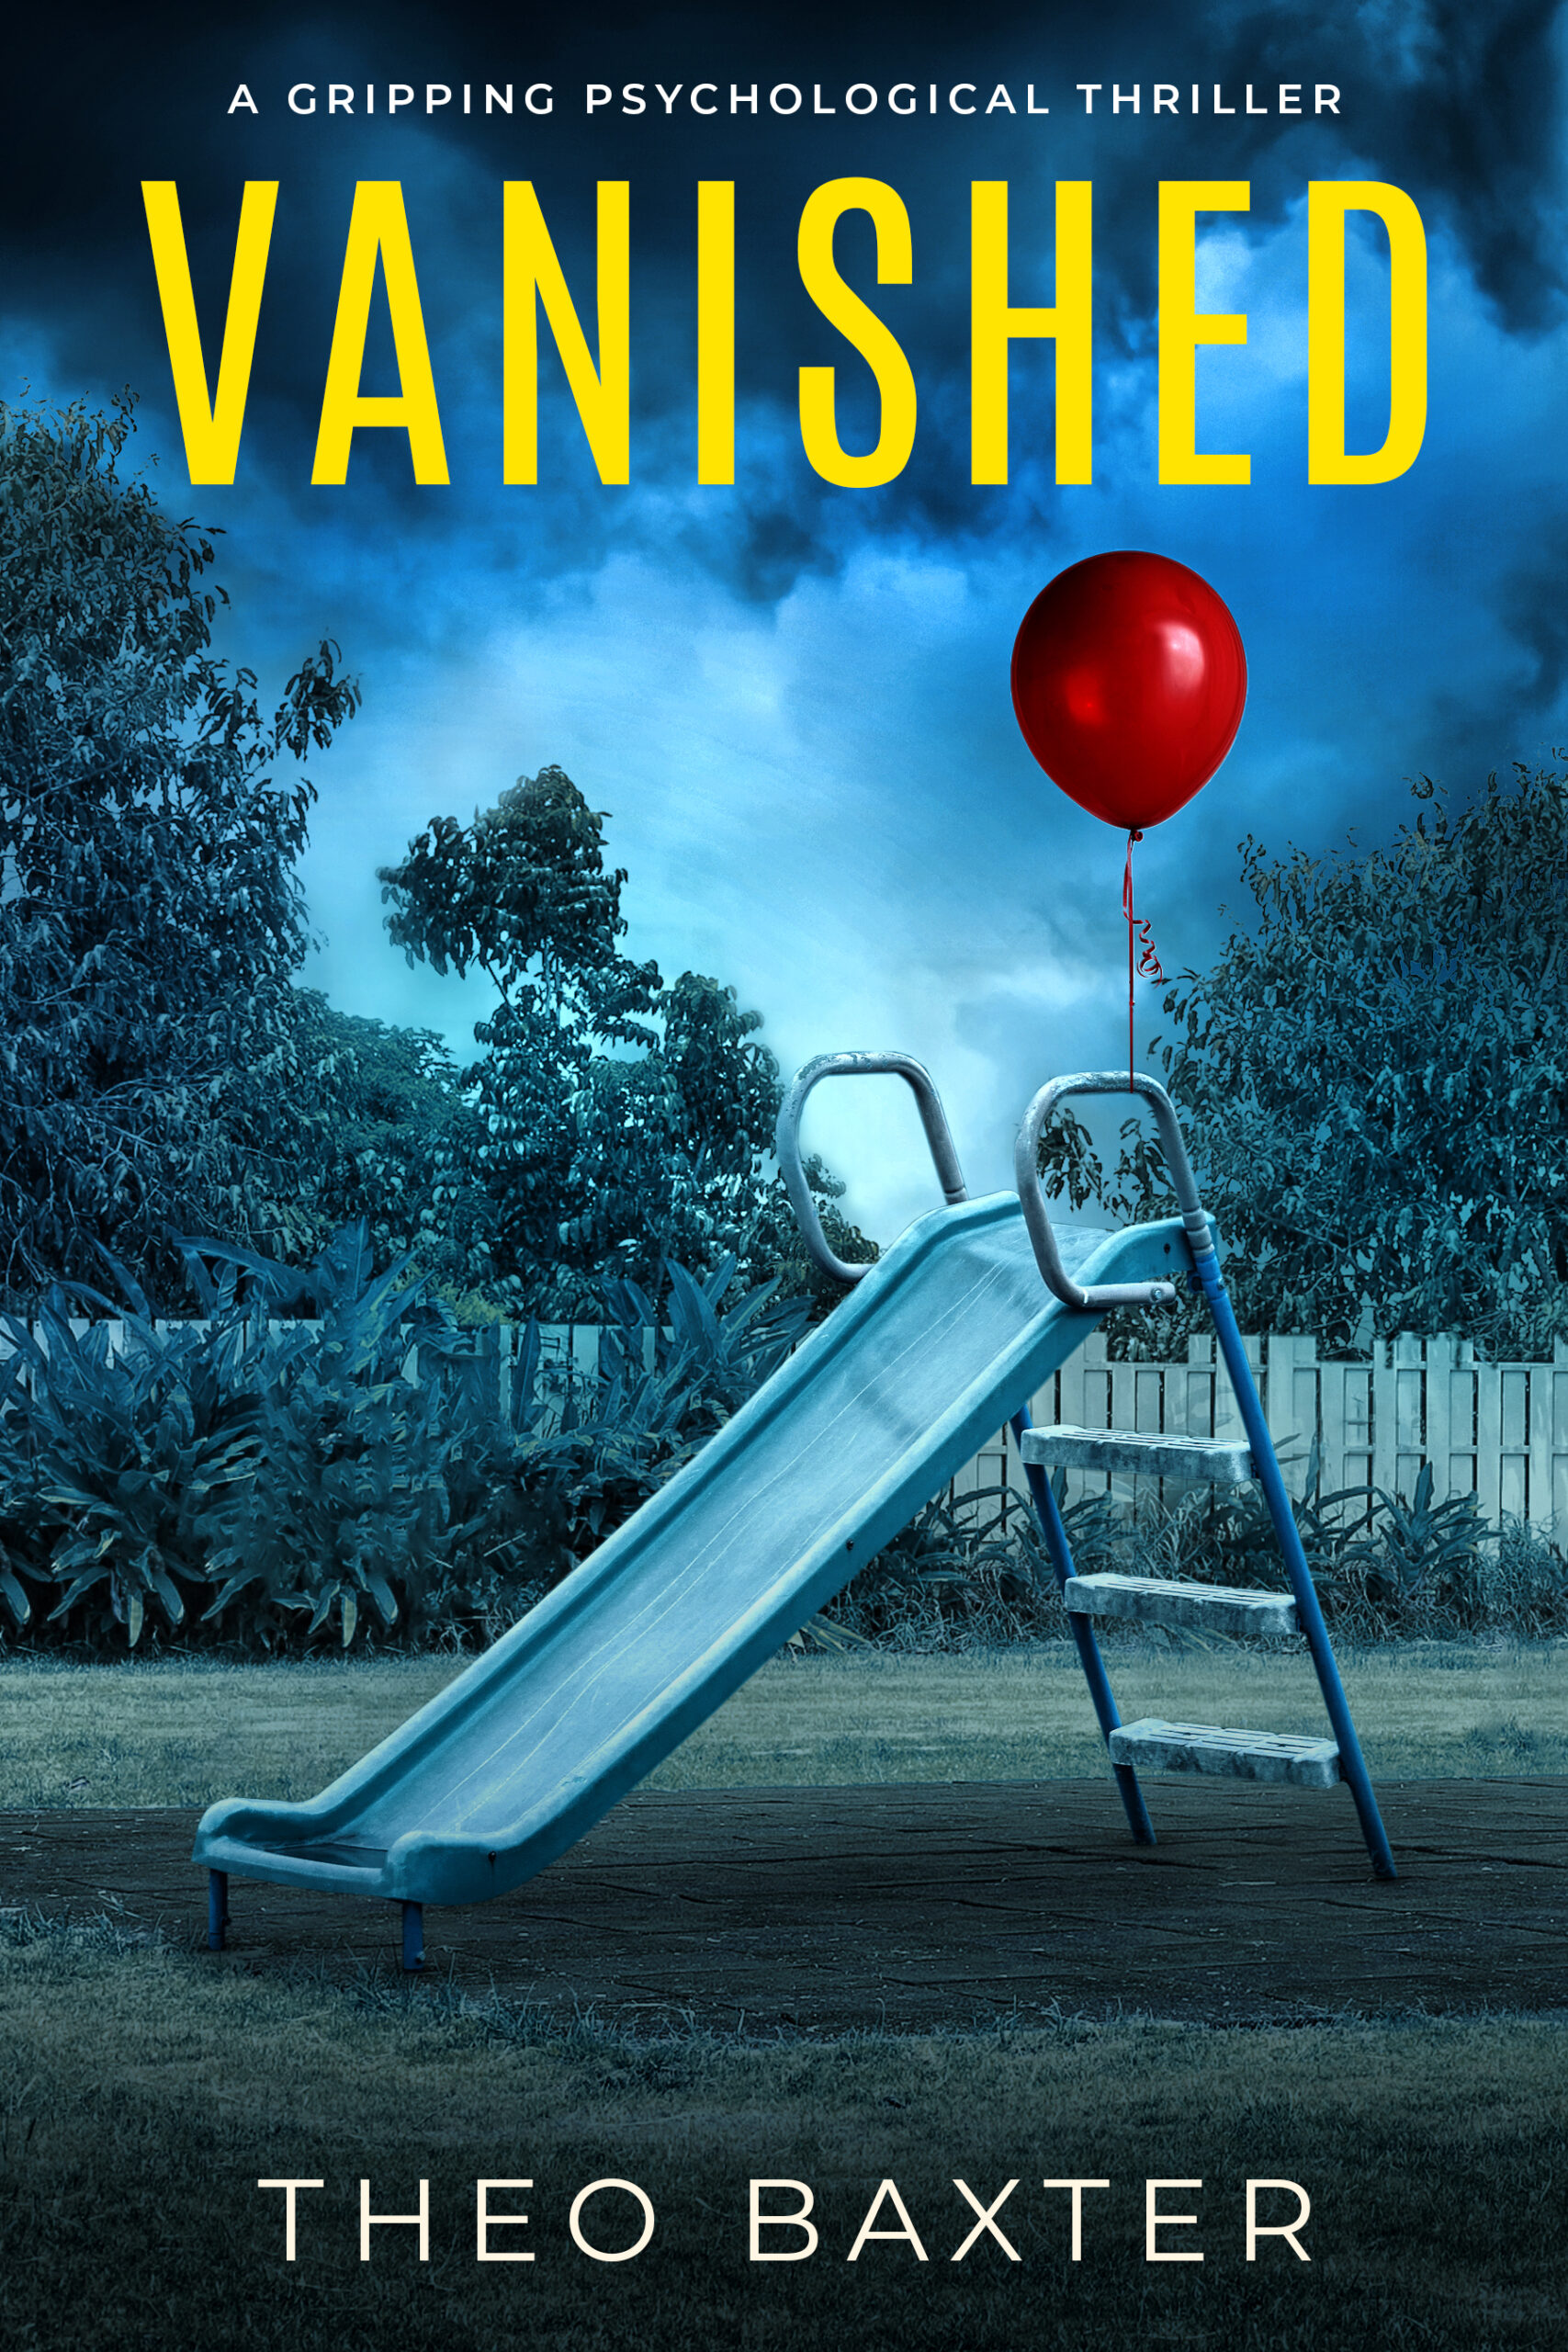 THEO BAXTER NEW RELEASE – VANISHED